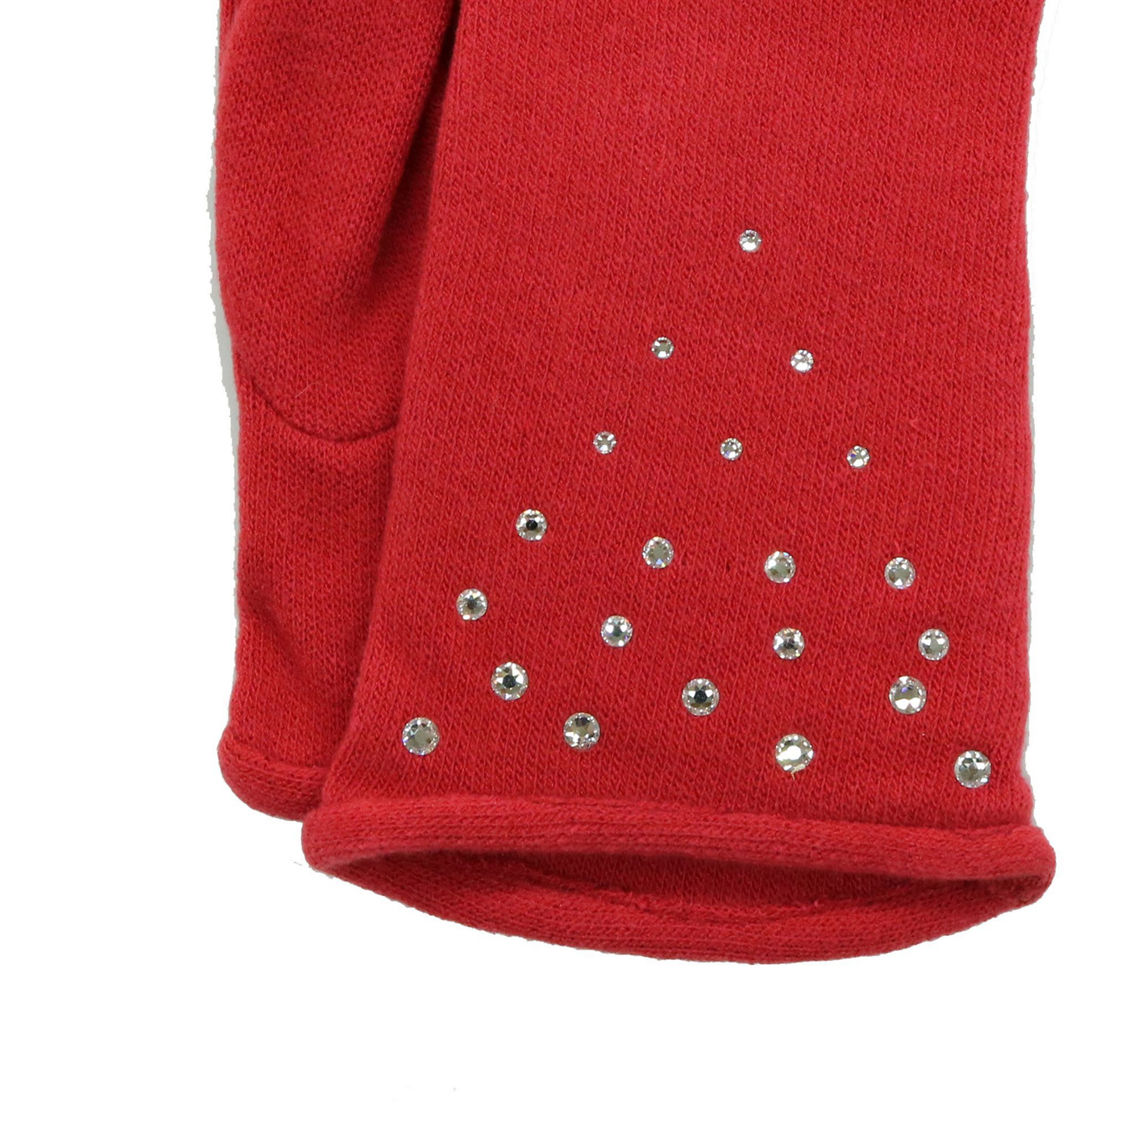 Portolano Gloves with Crystal Stones - Image 2 of 2